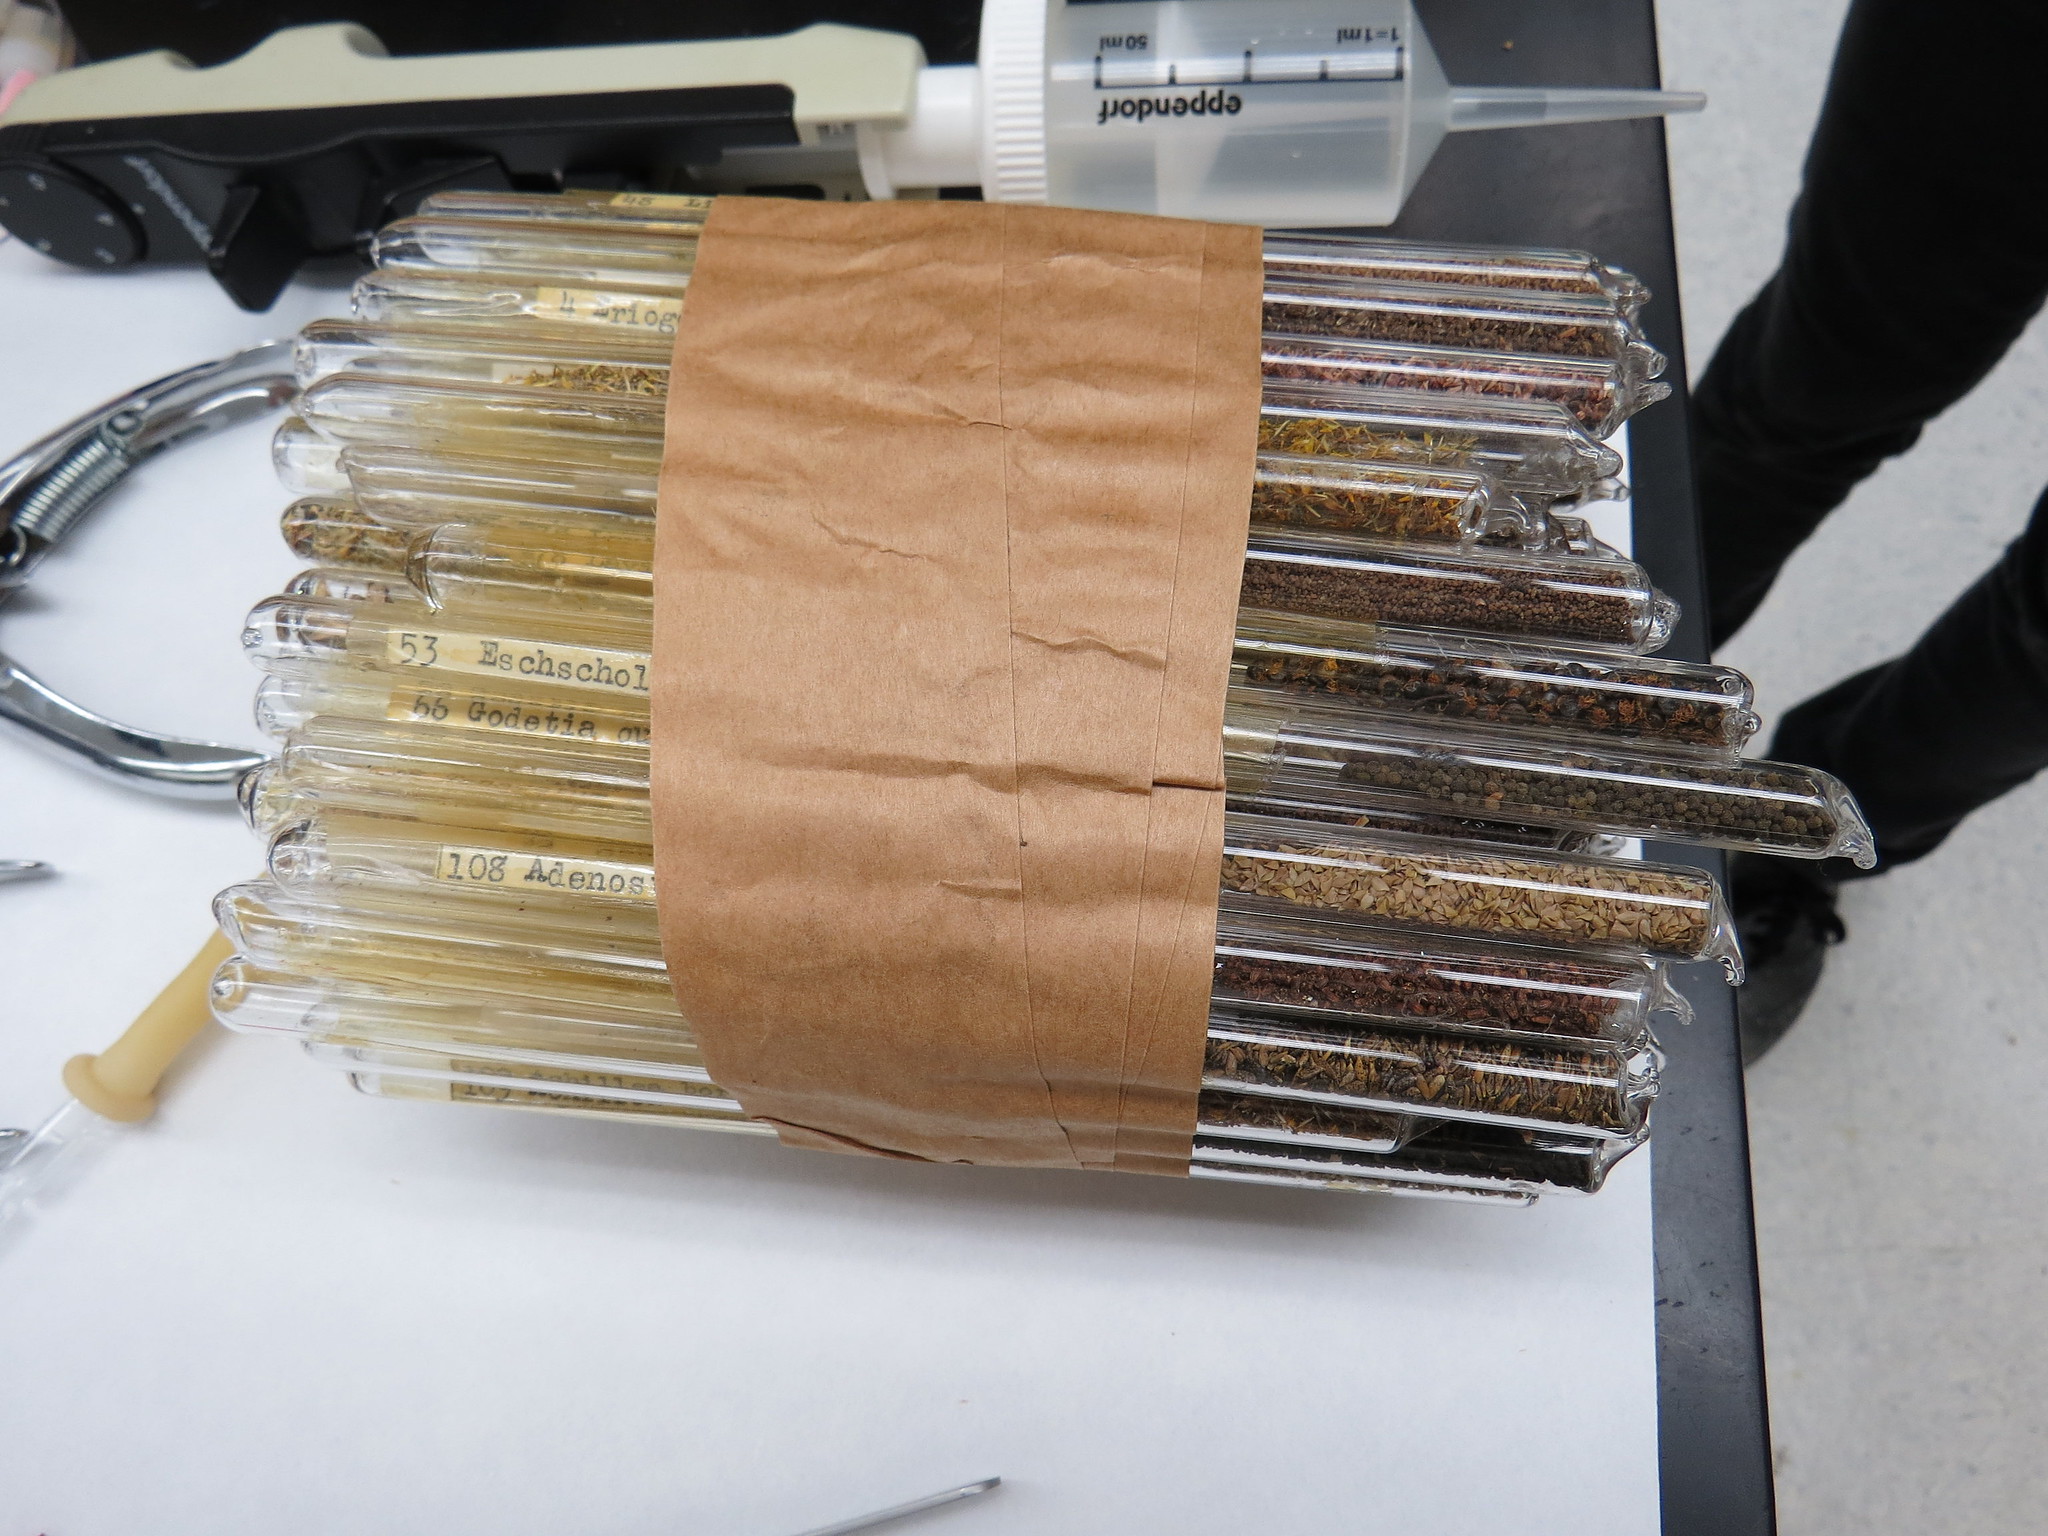 Image of wrapped seed tubes.